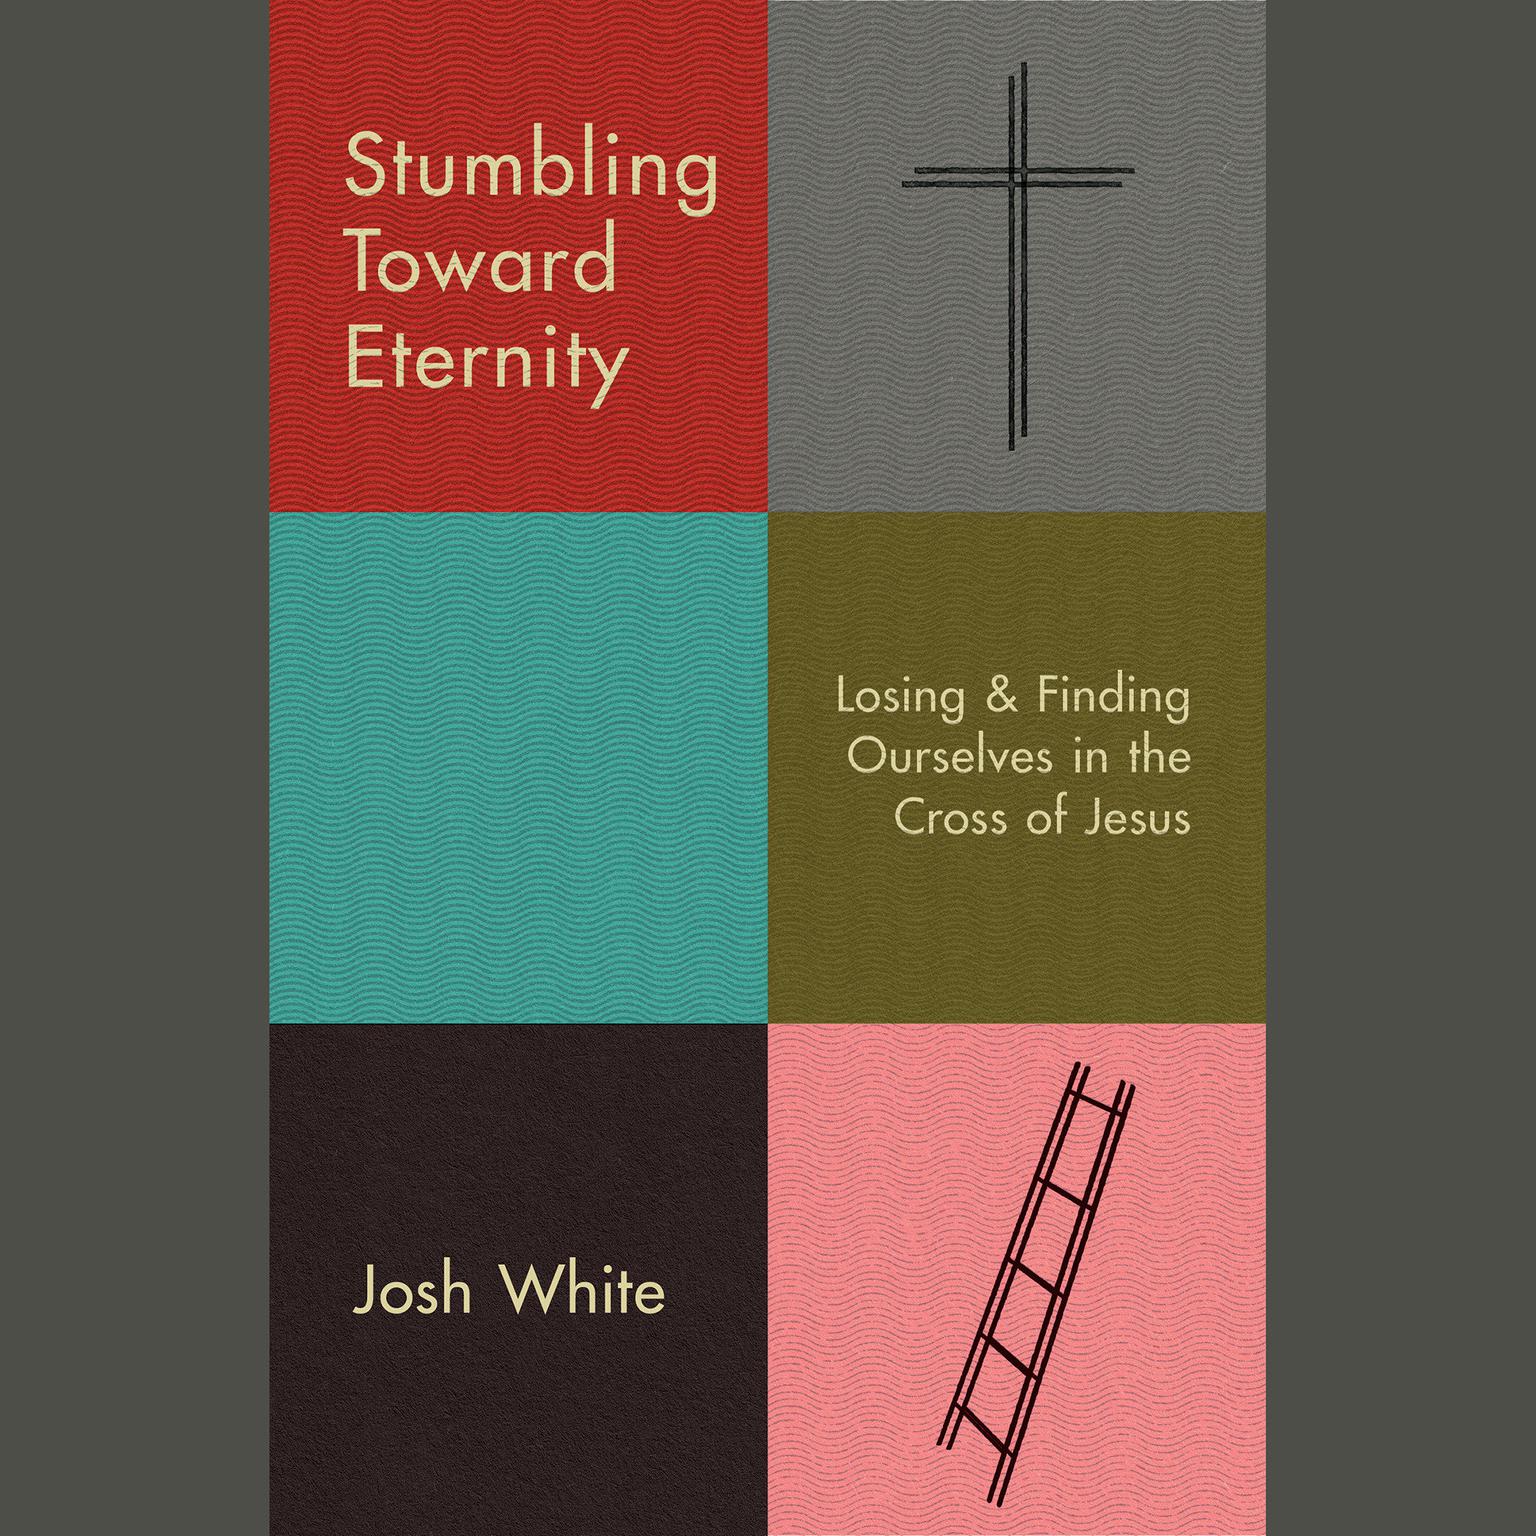 Stumbling Toward Eternity: Losing & Finding Ourselves in the Cross of Jesus Audiobook, by Josh White